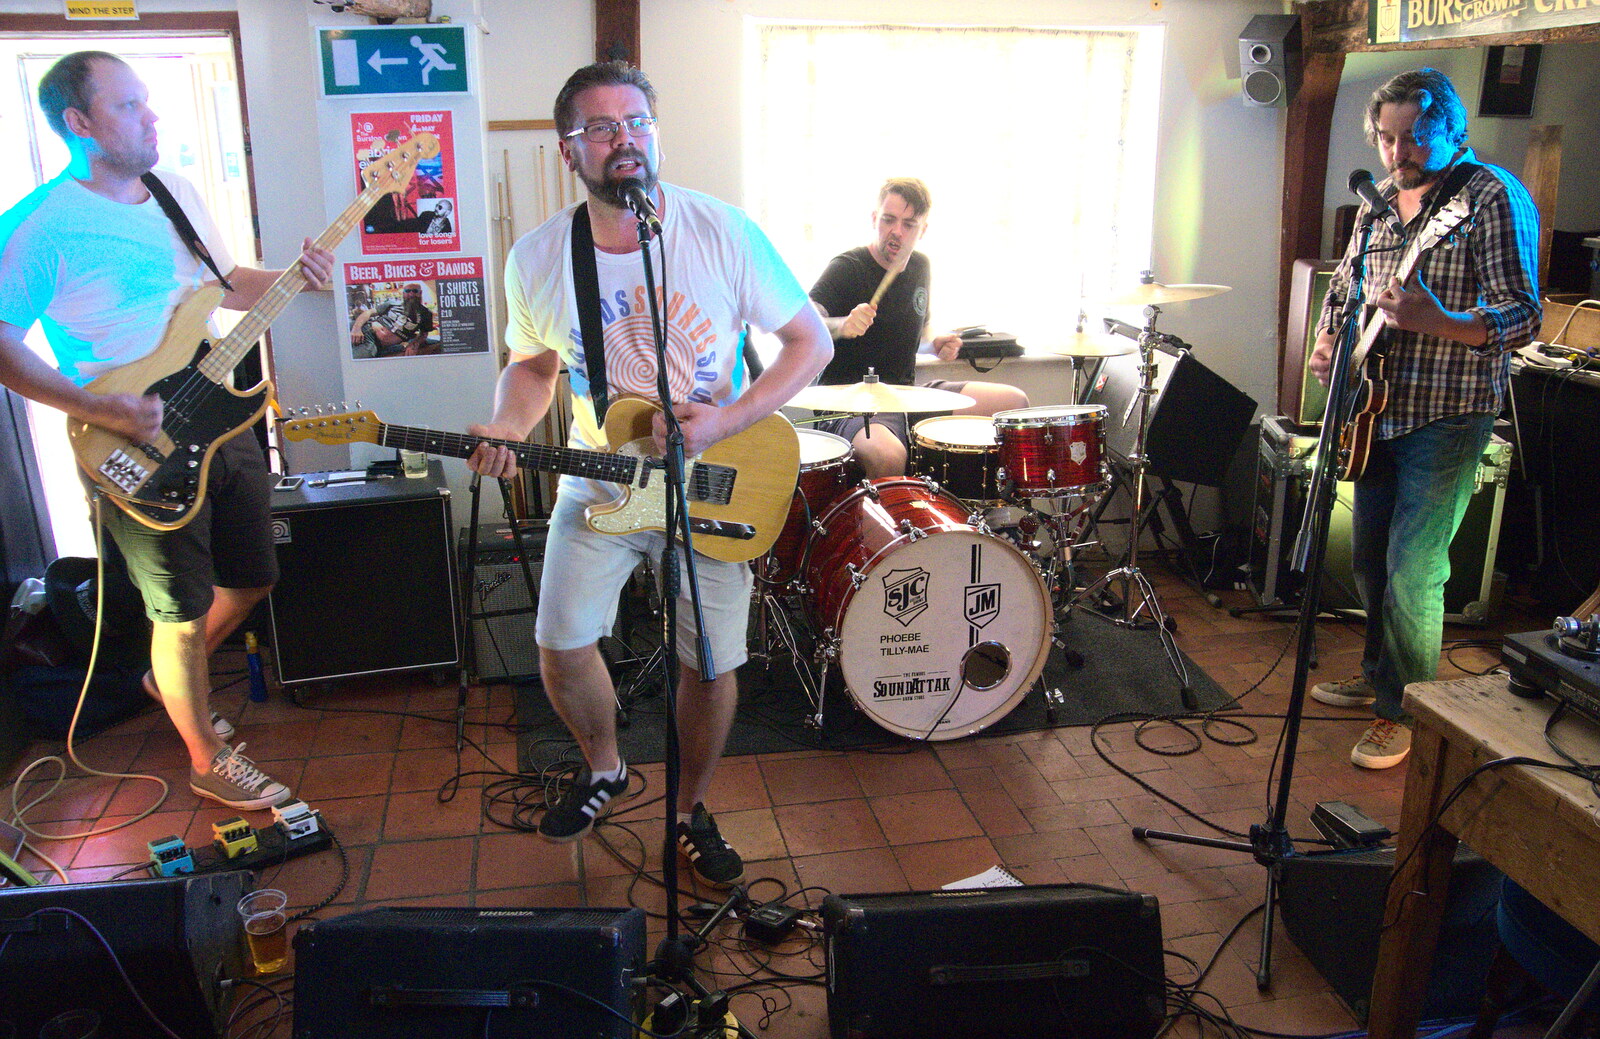 The band kicks off from Beer, Bikes and Bands, Burston Crown, Burston, Norfolk - 6th May 2018